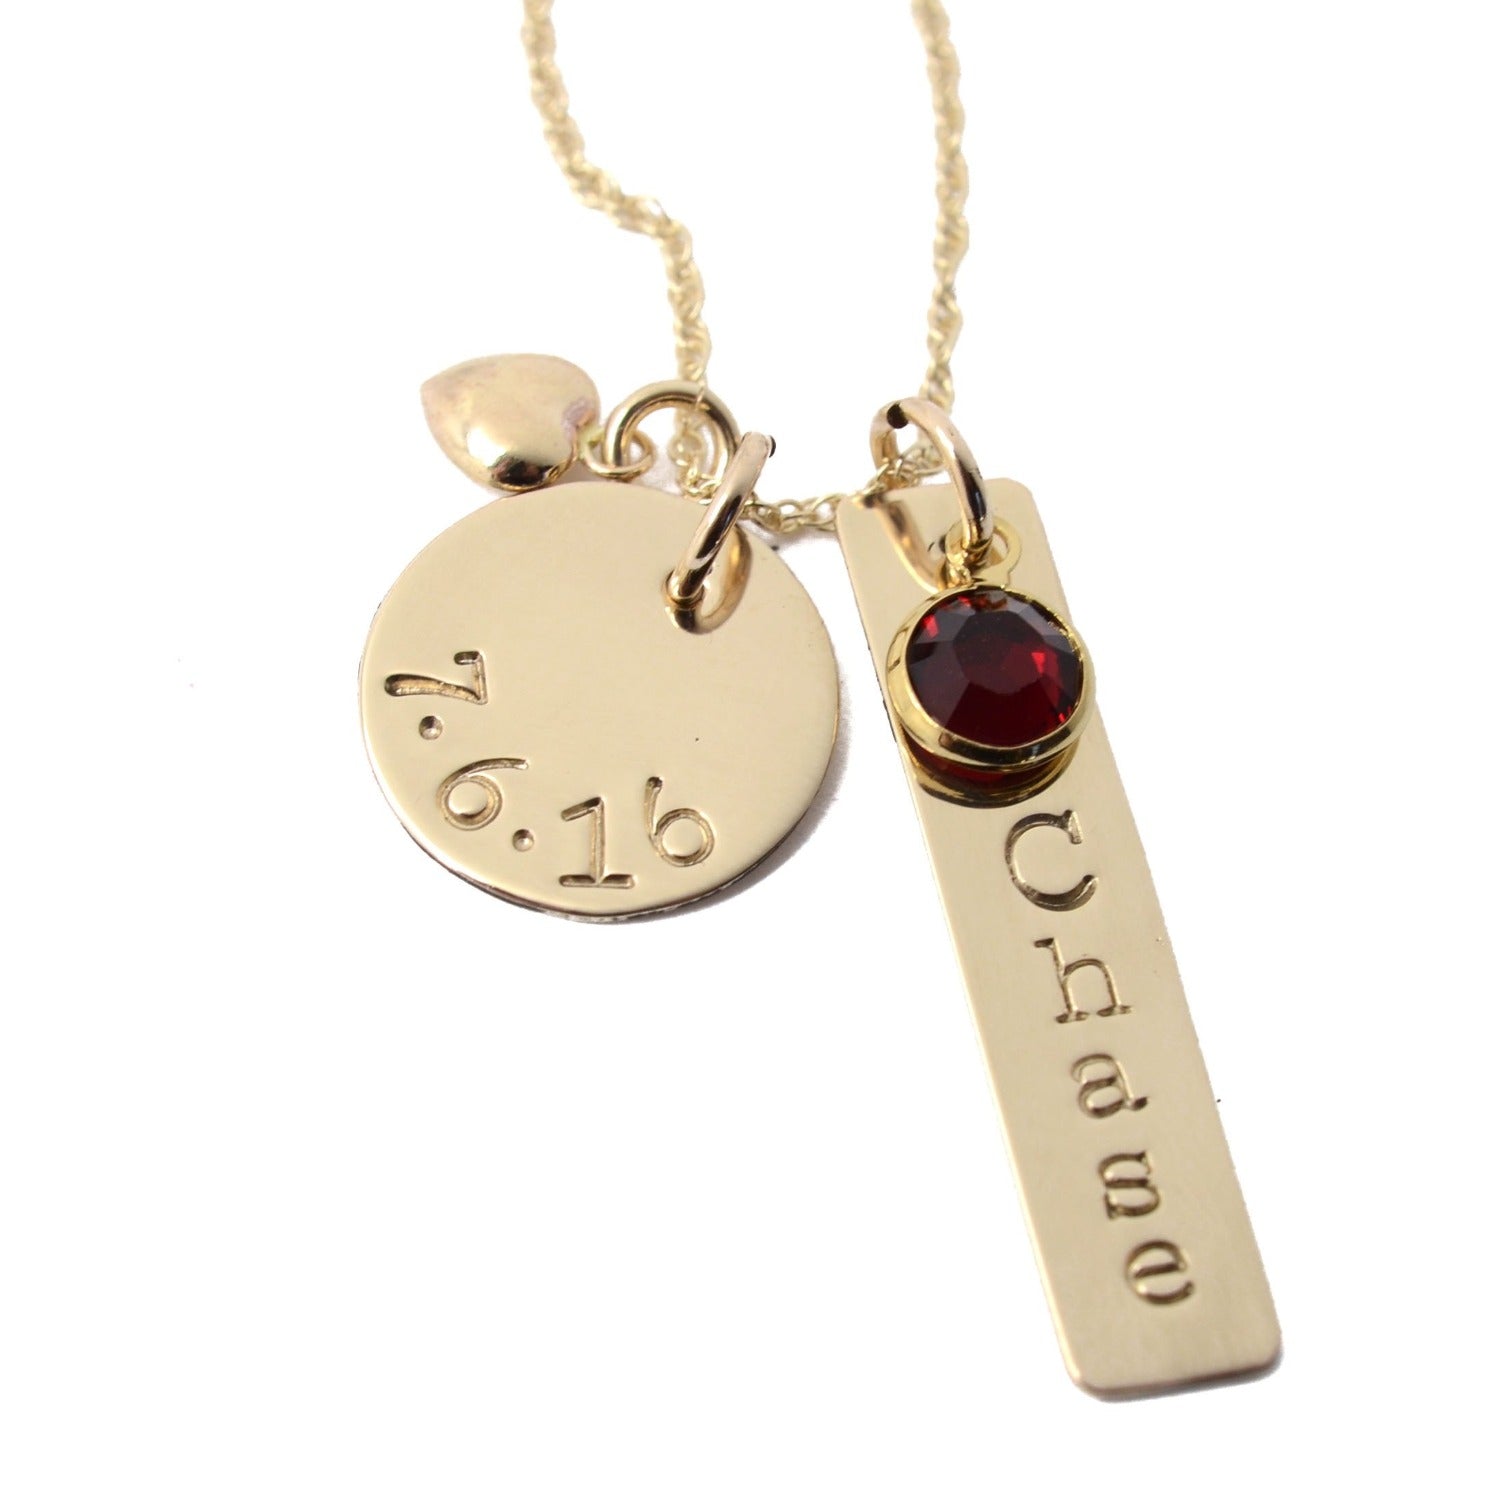 Disc & Tag Personalized Necklace - Gold Filled - Love It Personalized